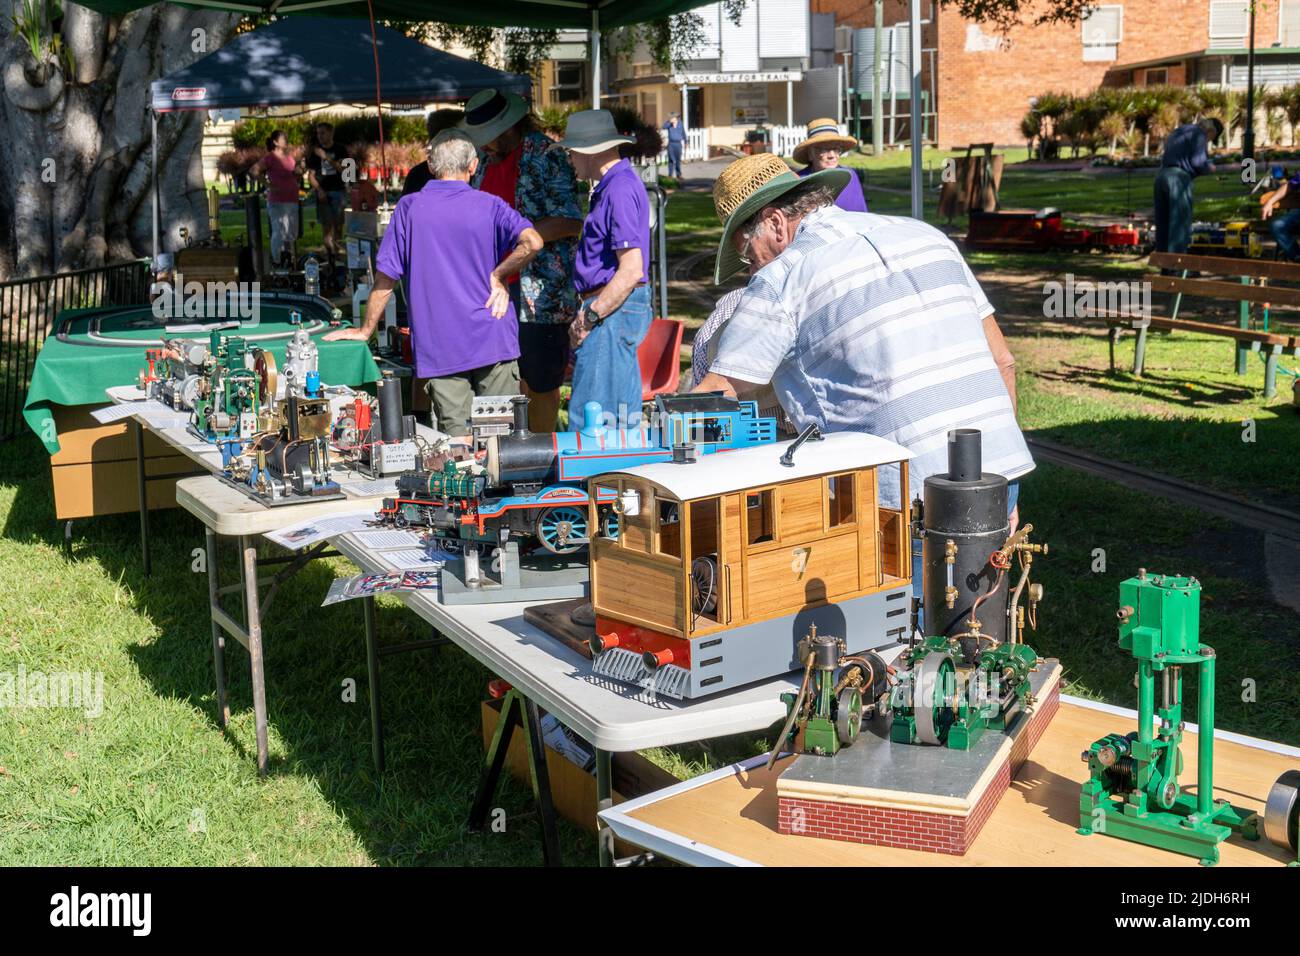 Model railway and steam engine enthusiasts displaying scale models, Queens Park, Maryborough, Queensland Australia Stock Photo